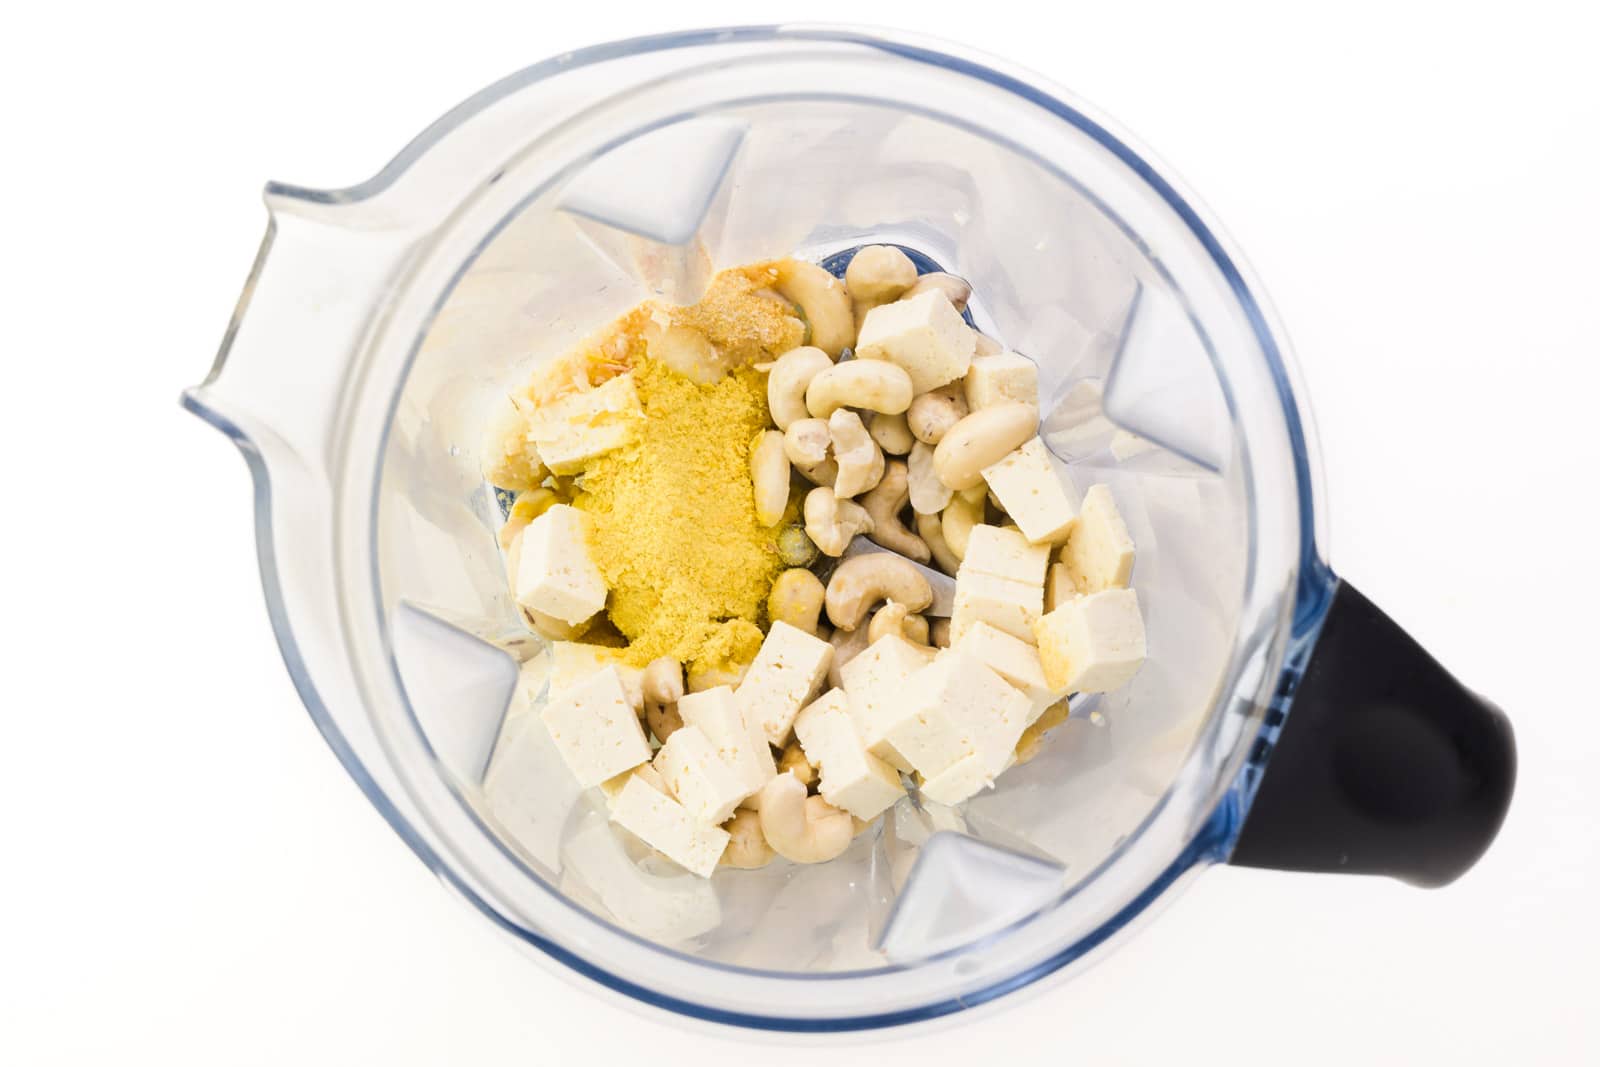 Looking down into a blender jar, there is crumbled tofu, soaked cashews, and more.